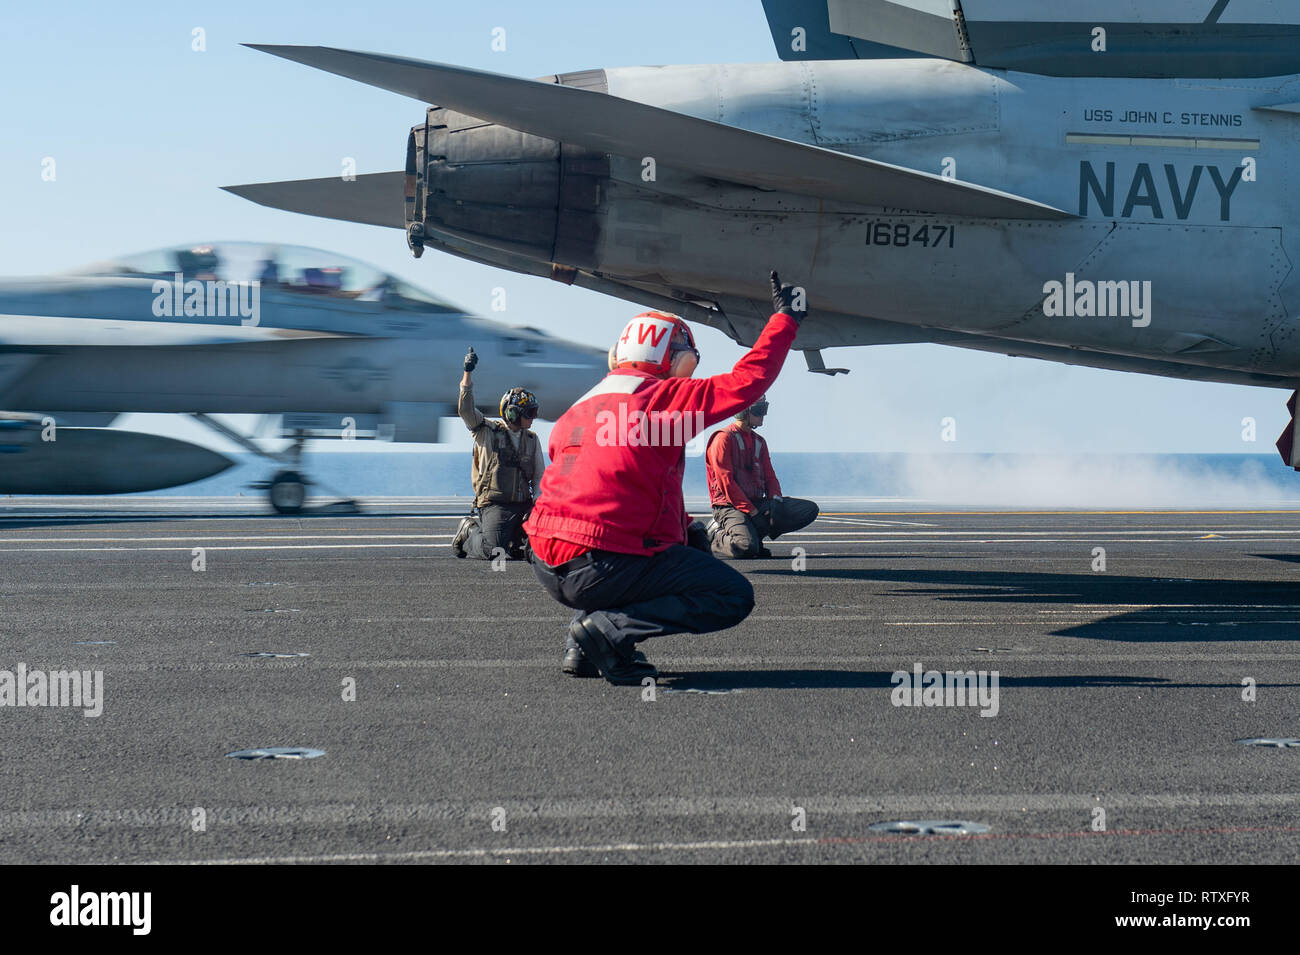 U.S. Sailors signal to launch an F/A-18E Super Hornet, assigned to Strike Fighter Squadron (VFA) 151, as an F/A-18F Super Hornet, assigned to Strike Fighter Squadron (VFA) 41, launches from the flight deck of the aircraft carrier USS John C. Stennis (CVN 74) in the South China Sea, March 2, 2019. The John C. Stennis is deployed in the U.S. 7th Fleet area of operations in support of security and stability in the Indo-Pacific region. (U.S. Navy photo by Mass Communication Specialist Seaman Jeffery L. Southerland) Stock Photo